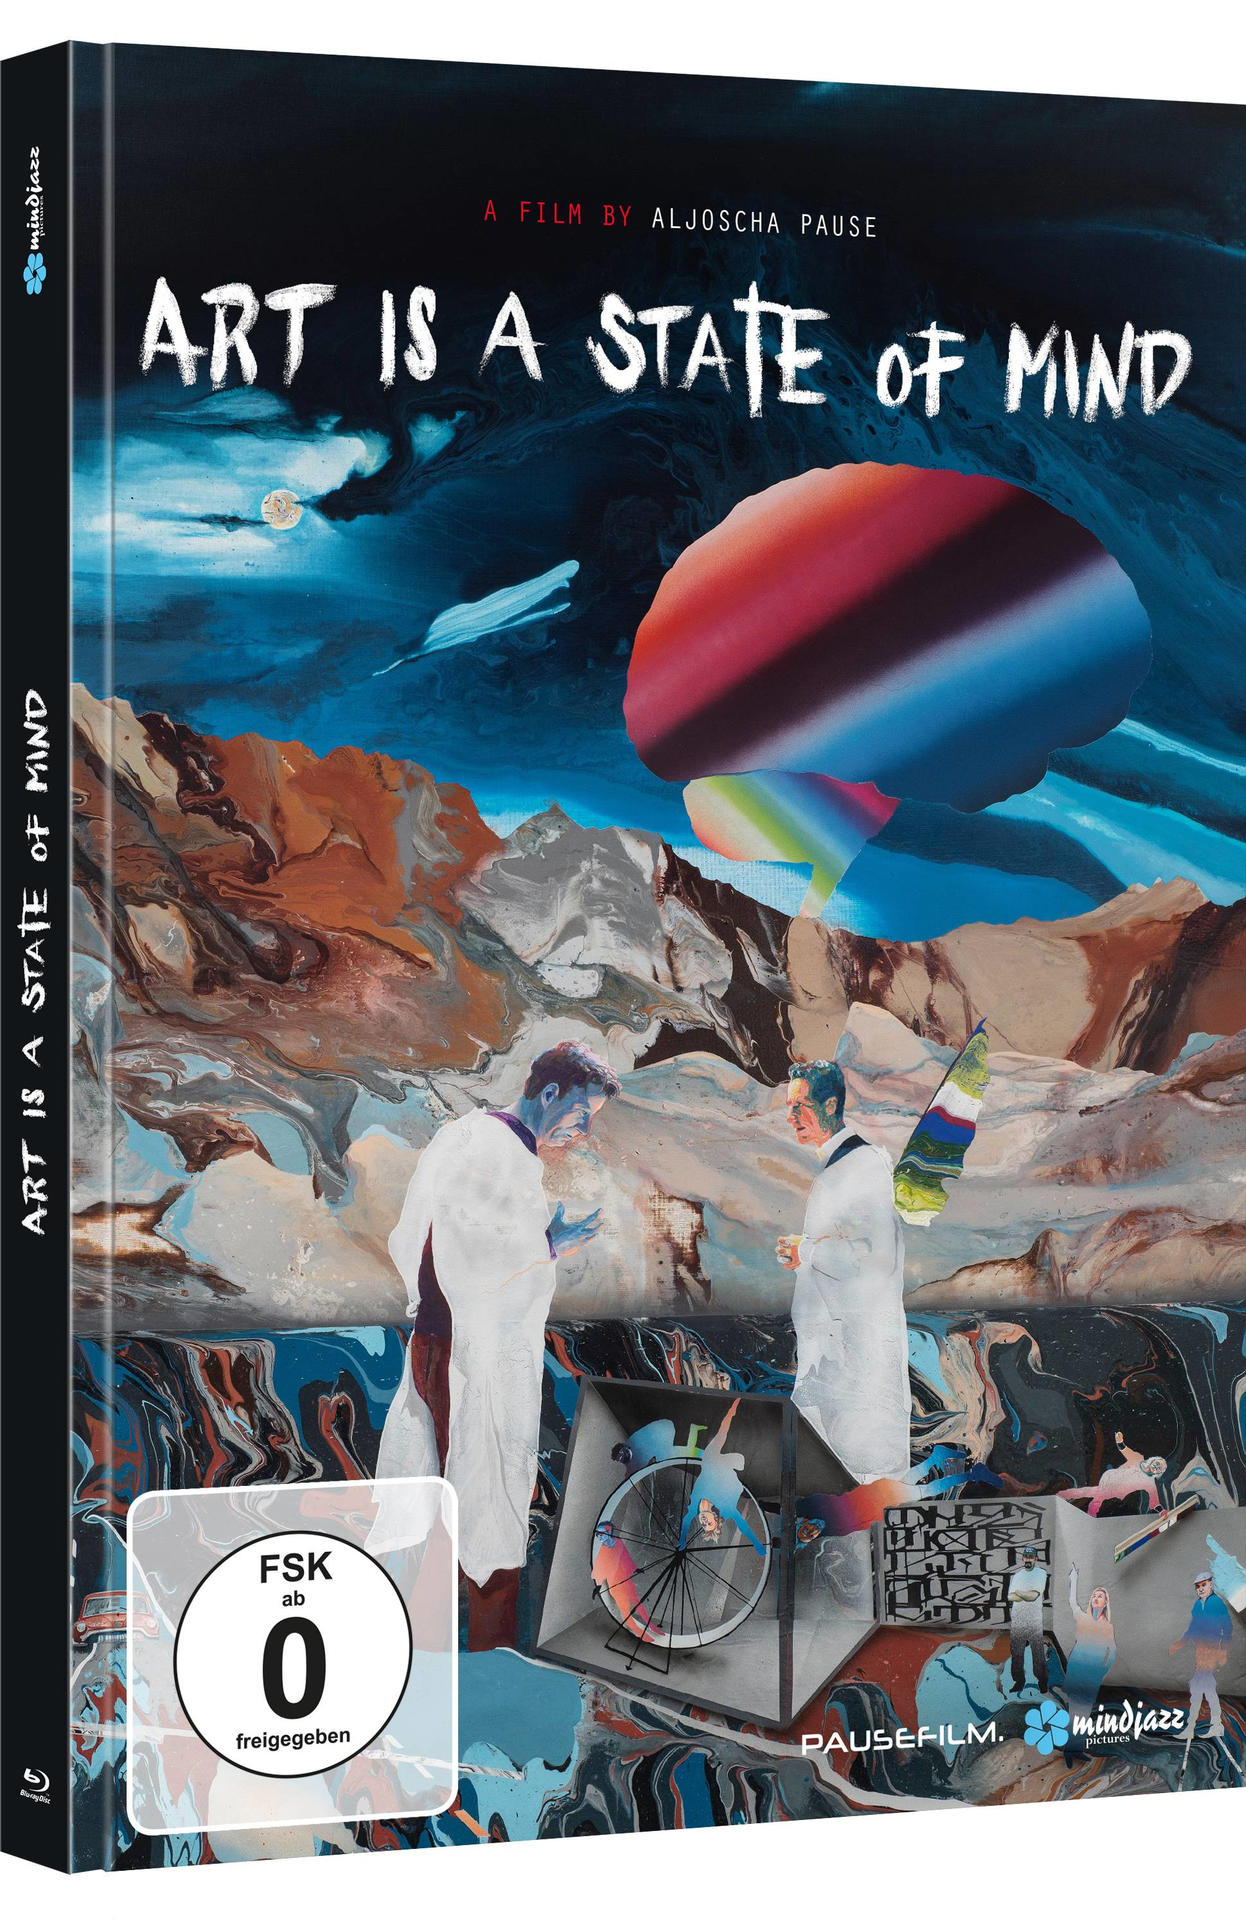 Art is a Mind of Blu-ray State